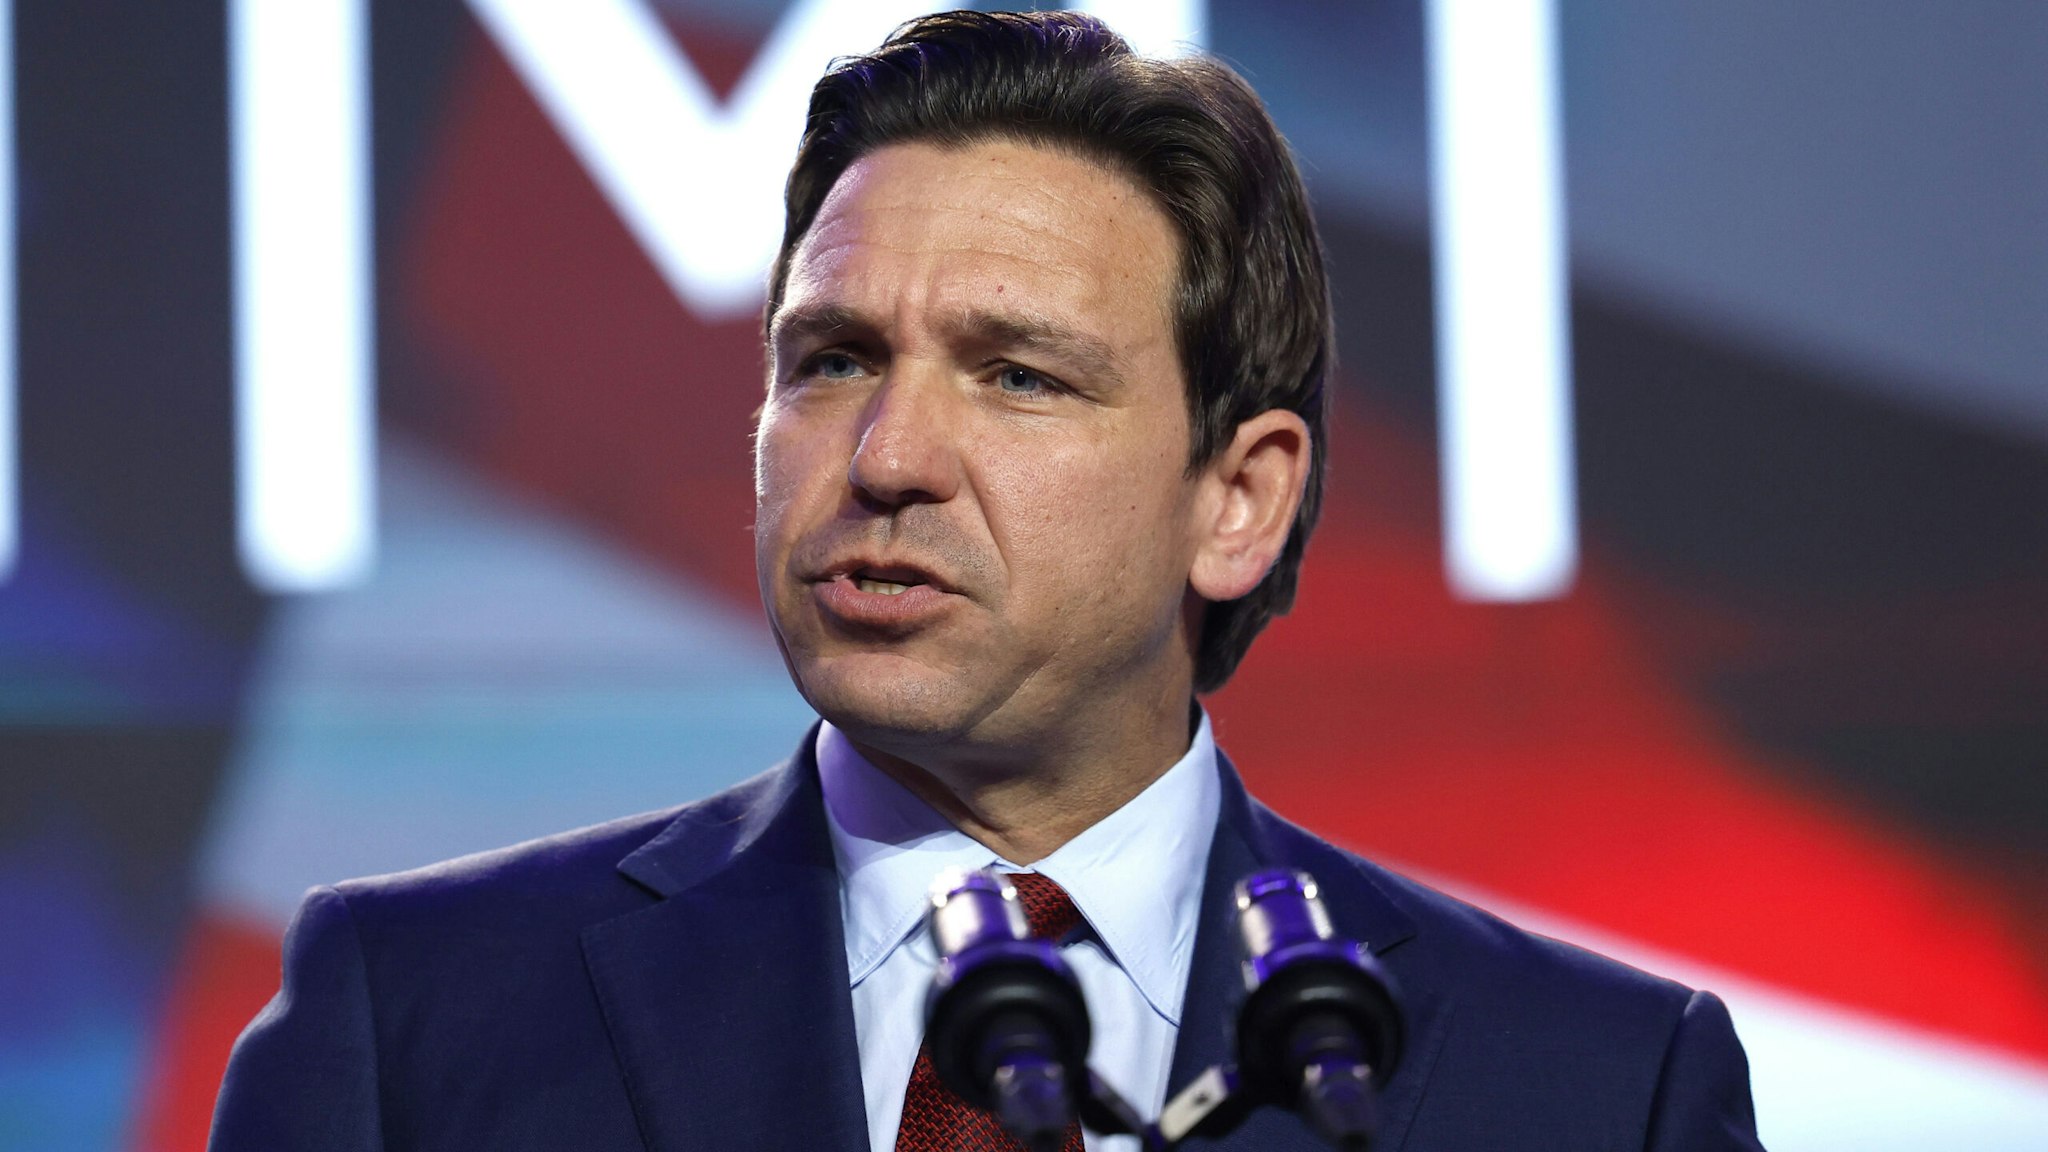 WASHINGTON, DC - SEPTEMBER 15: Republican presidential candidate Florida Governor Ron DeSantis speaks at the Pray Vote Stand Summit at the Omni Shoreham Hotel on September 15, 2023 in Washington, DC. The summit featured remarks from multiple 2024 Republican Presidential candidates making their case to the conservative audience members.